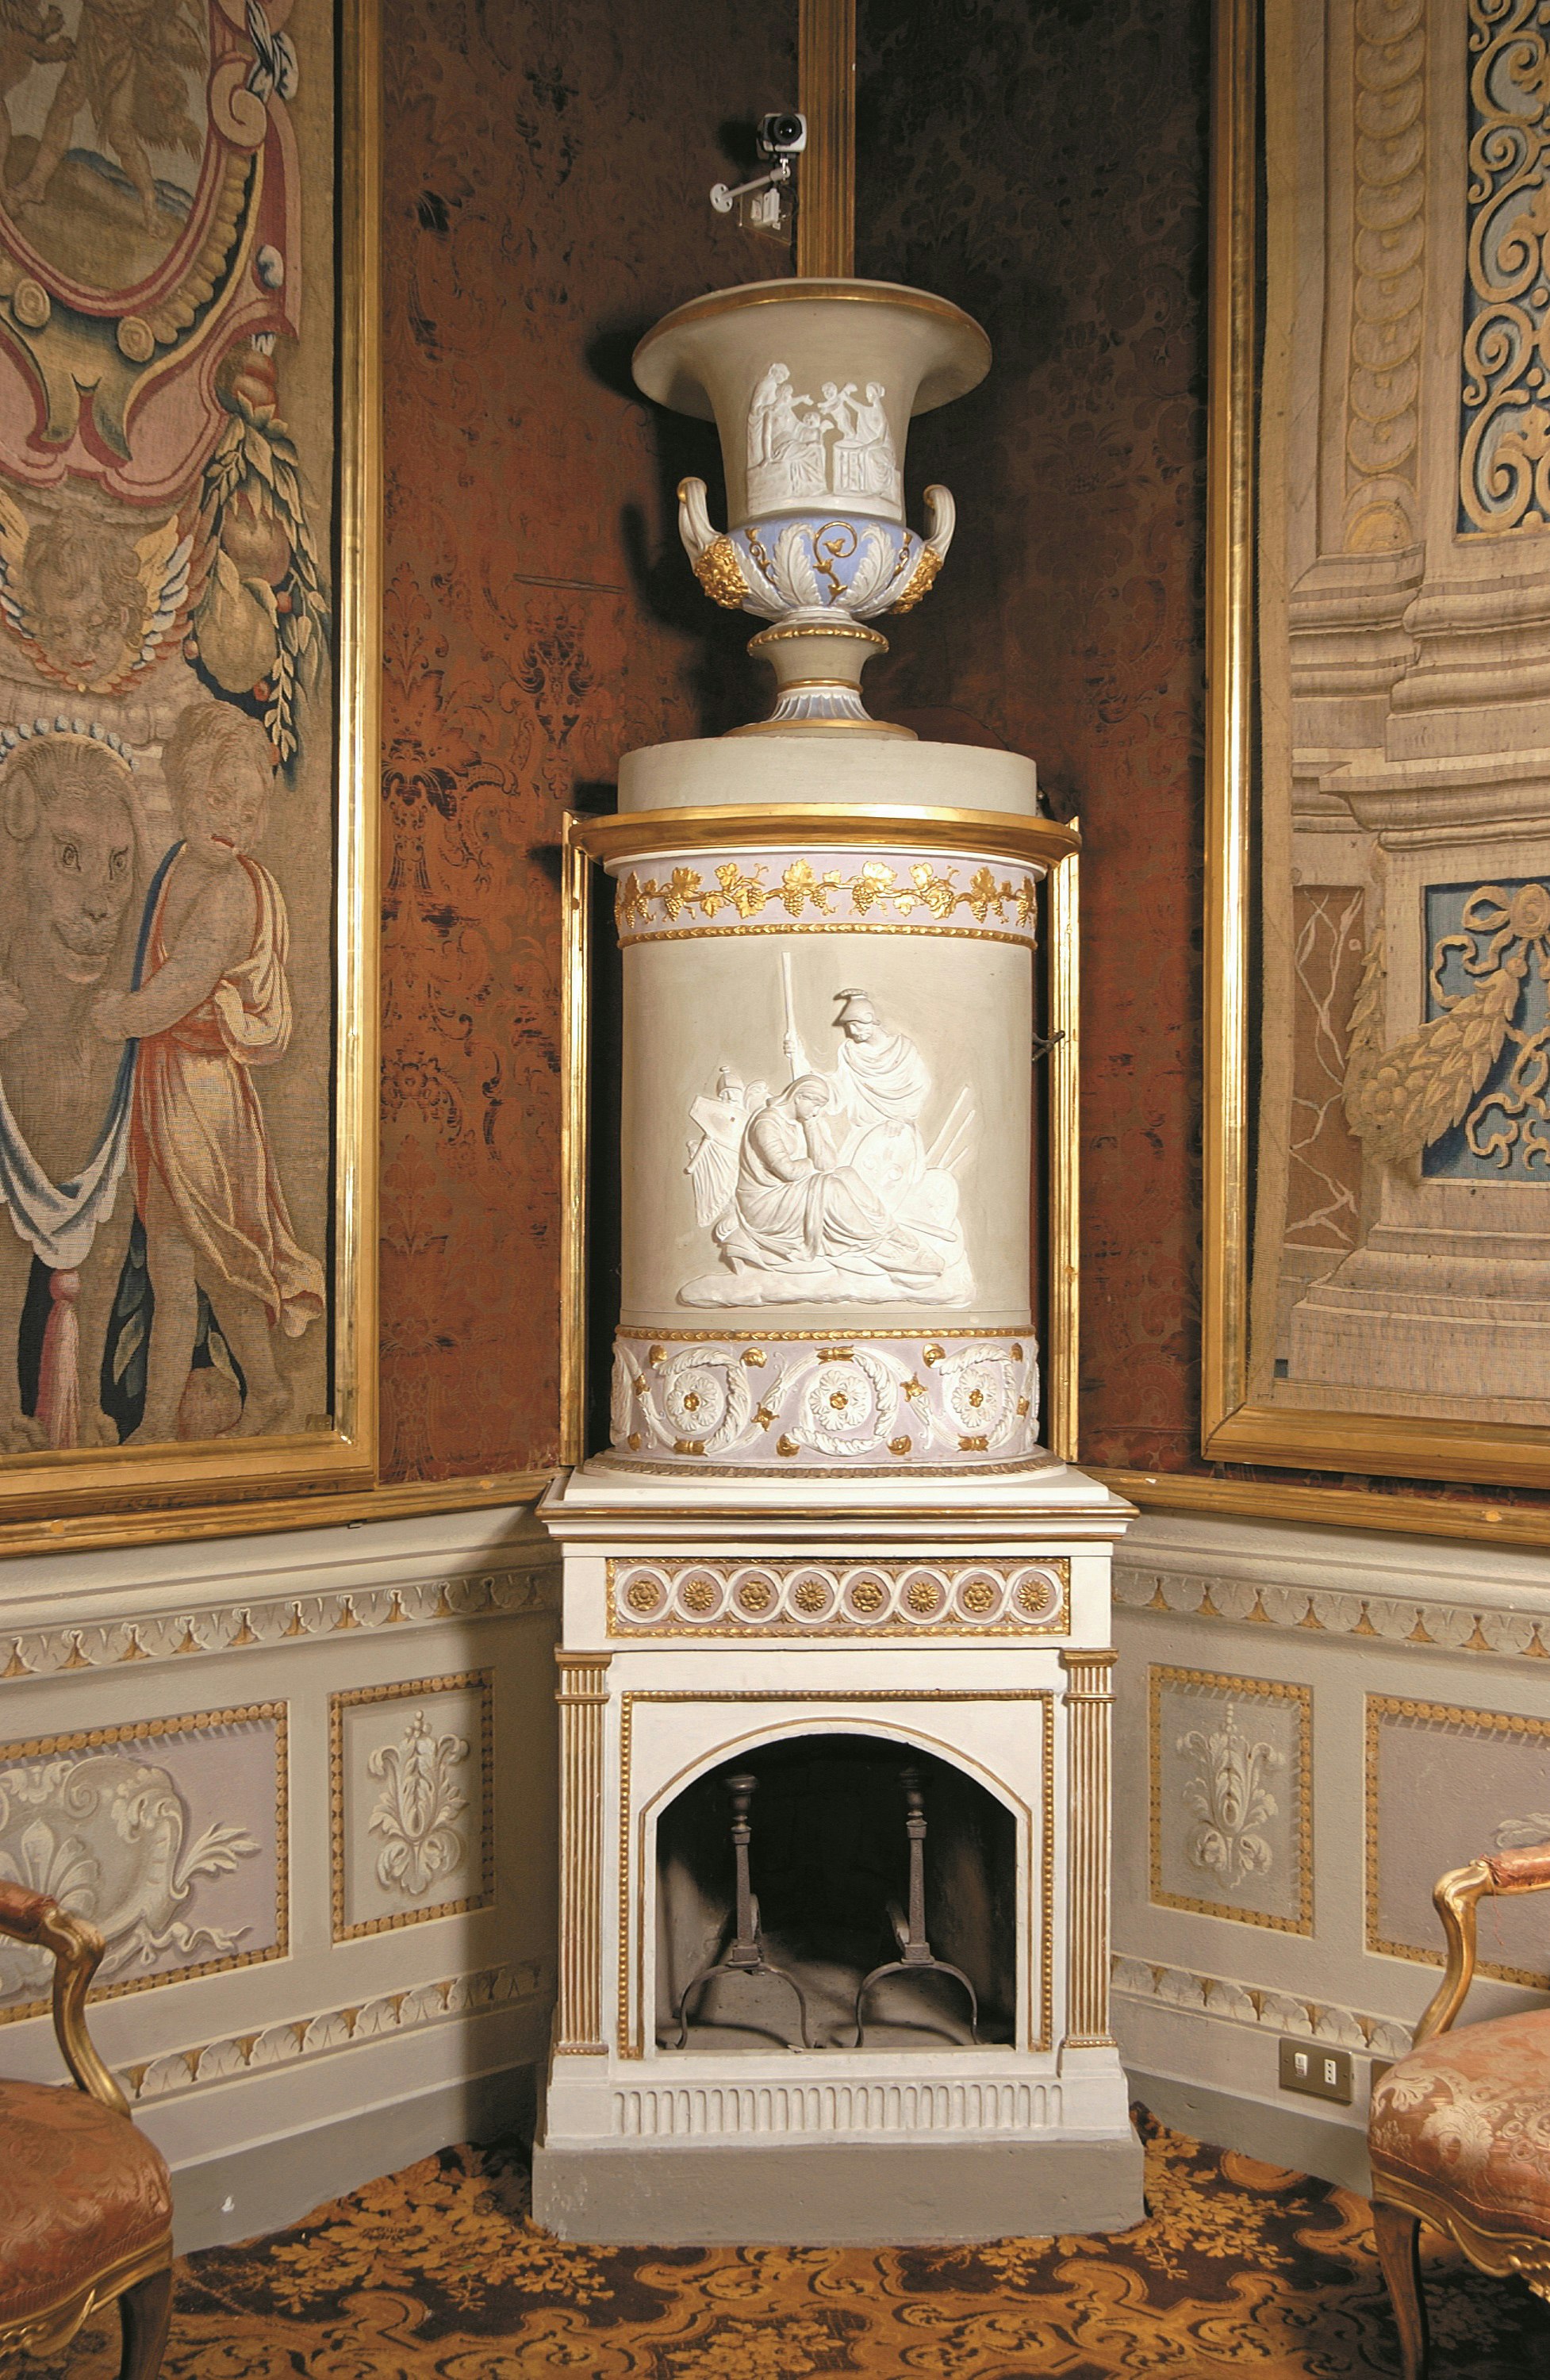 “Fireplace” stoves